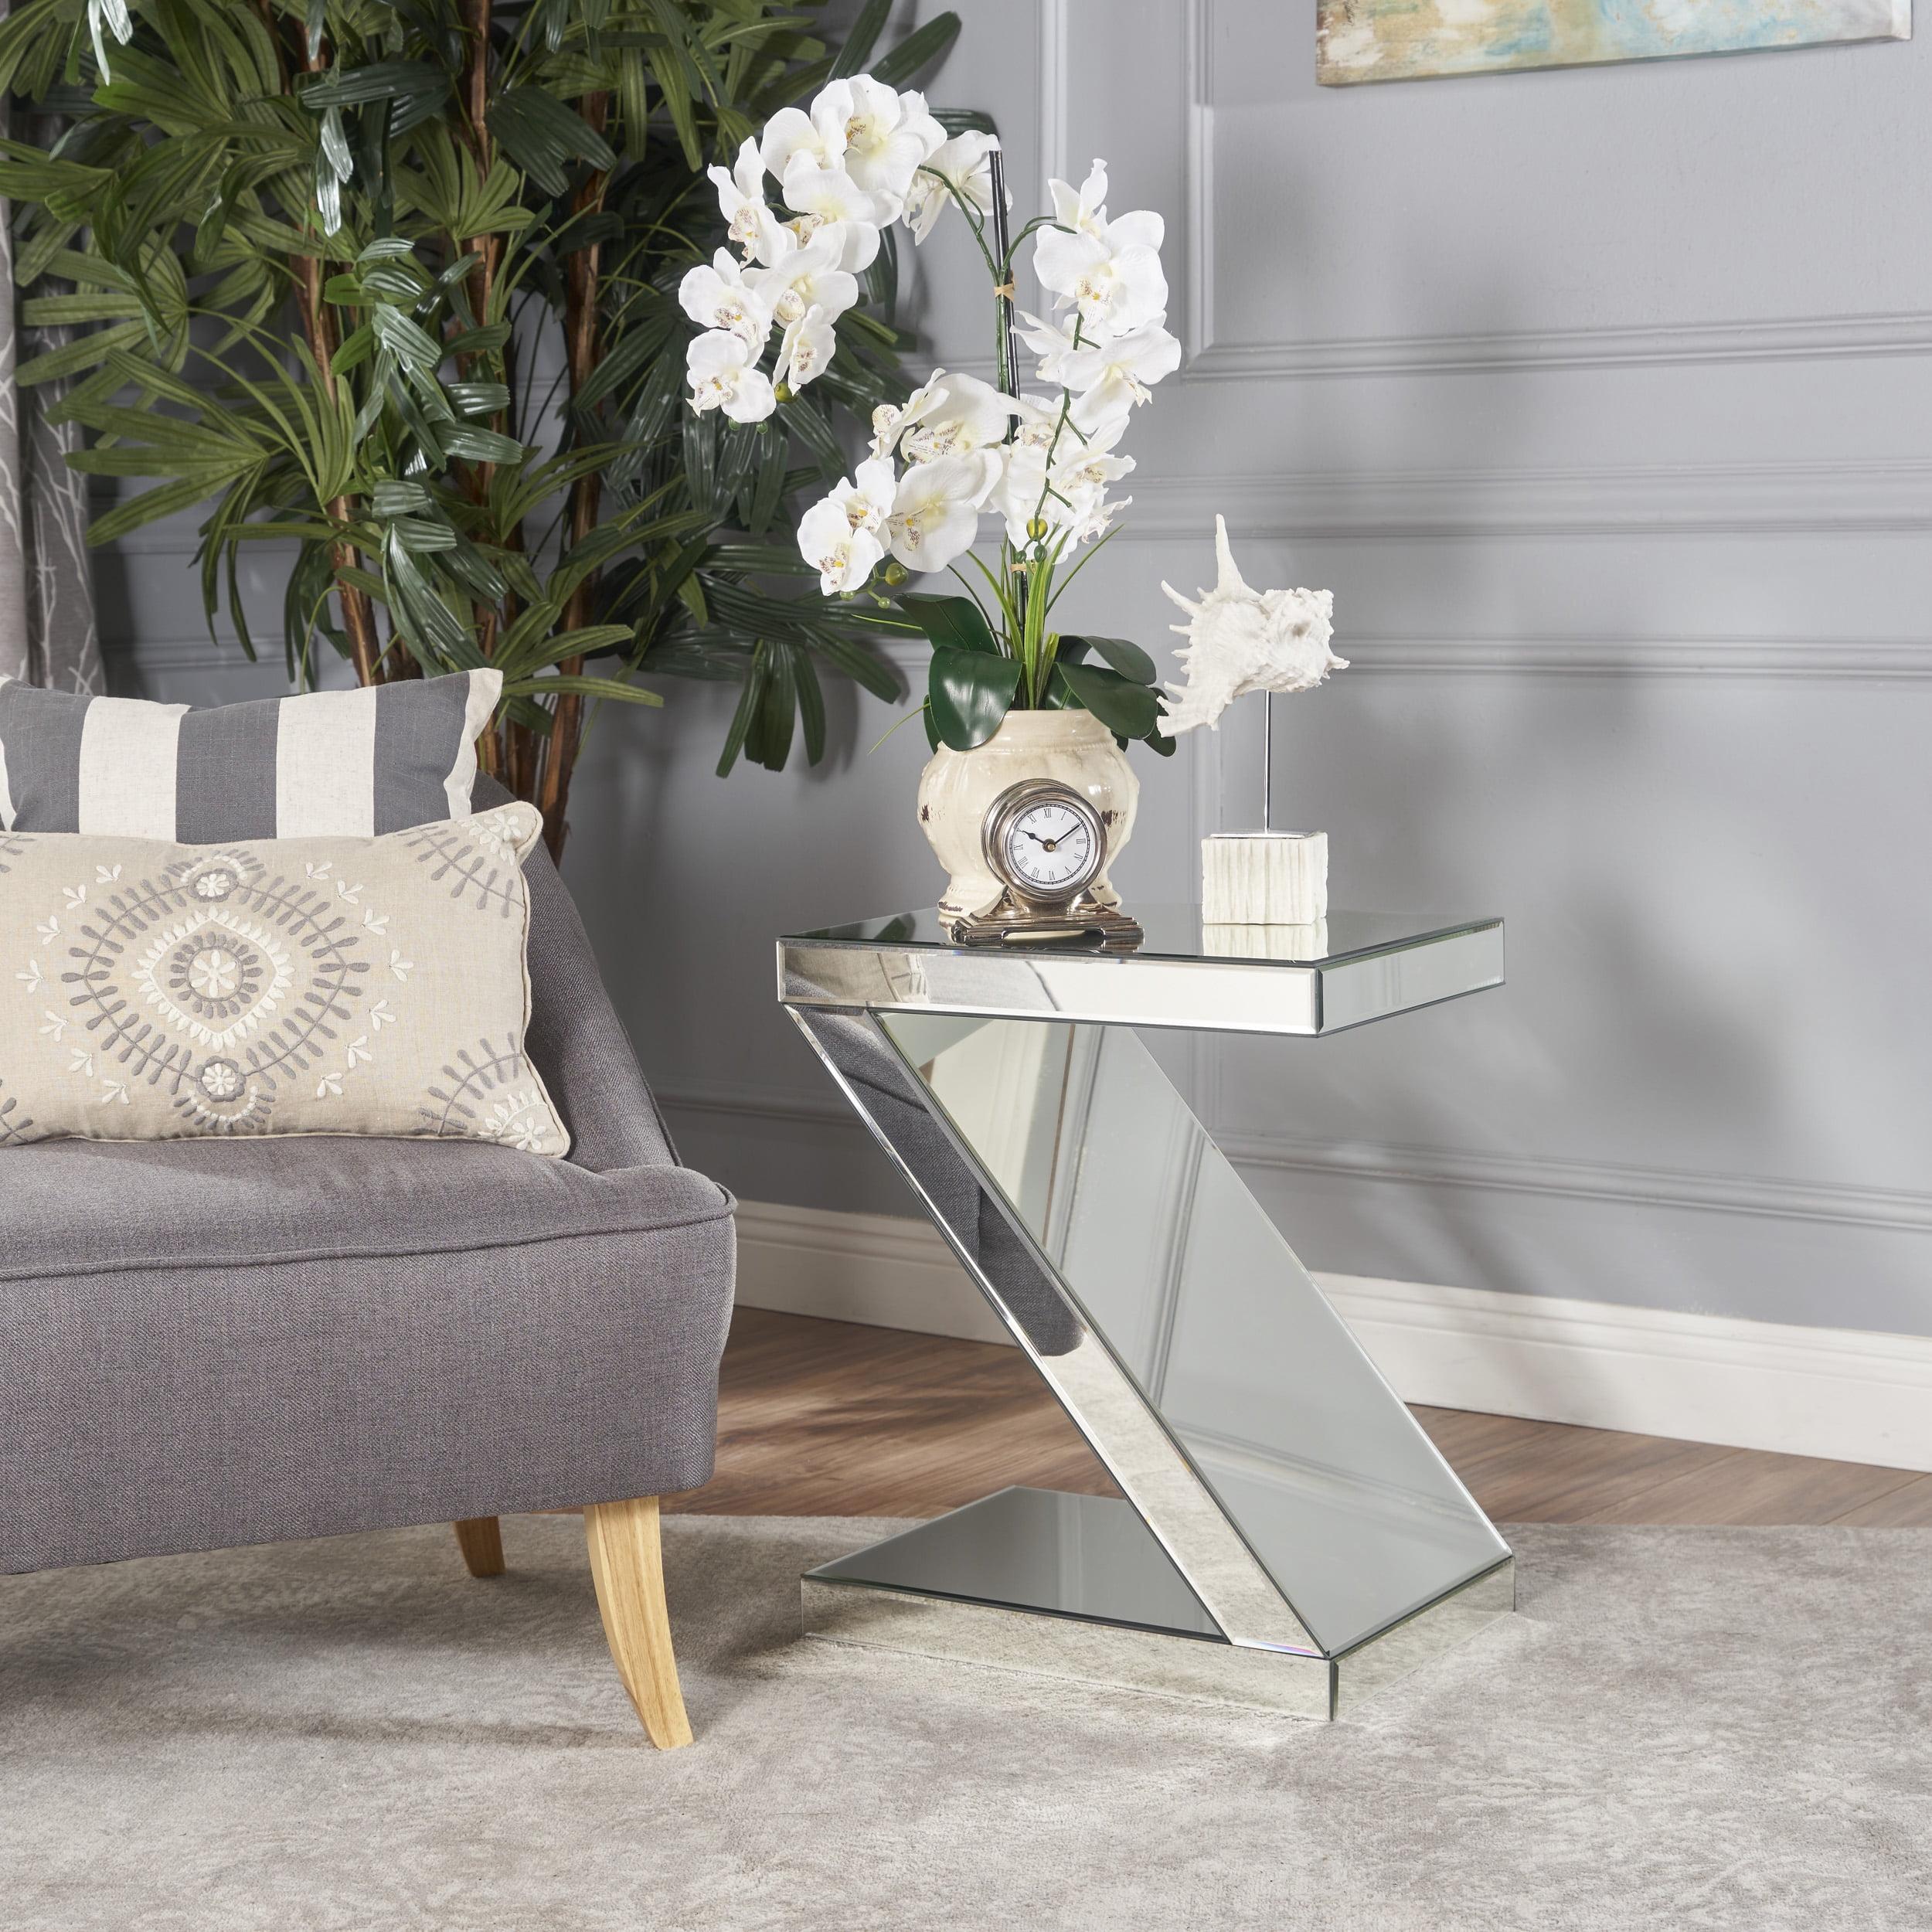 Zara 19.6" Mirrored Glass Z-Shaped End Table